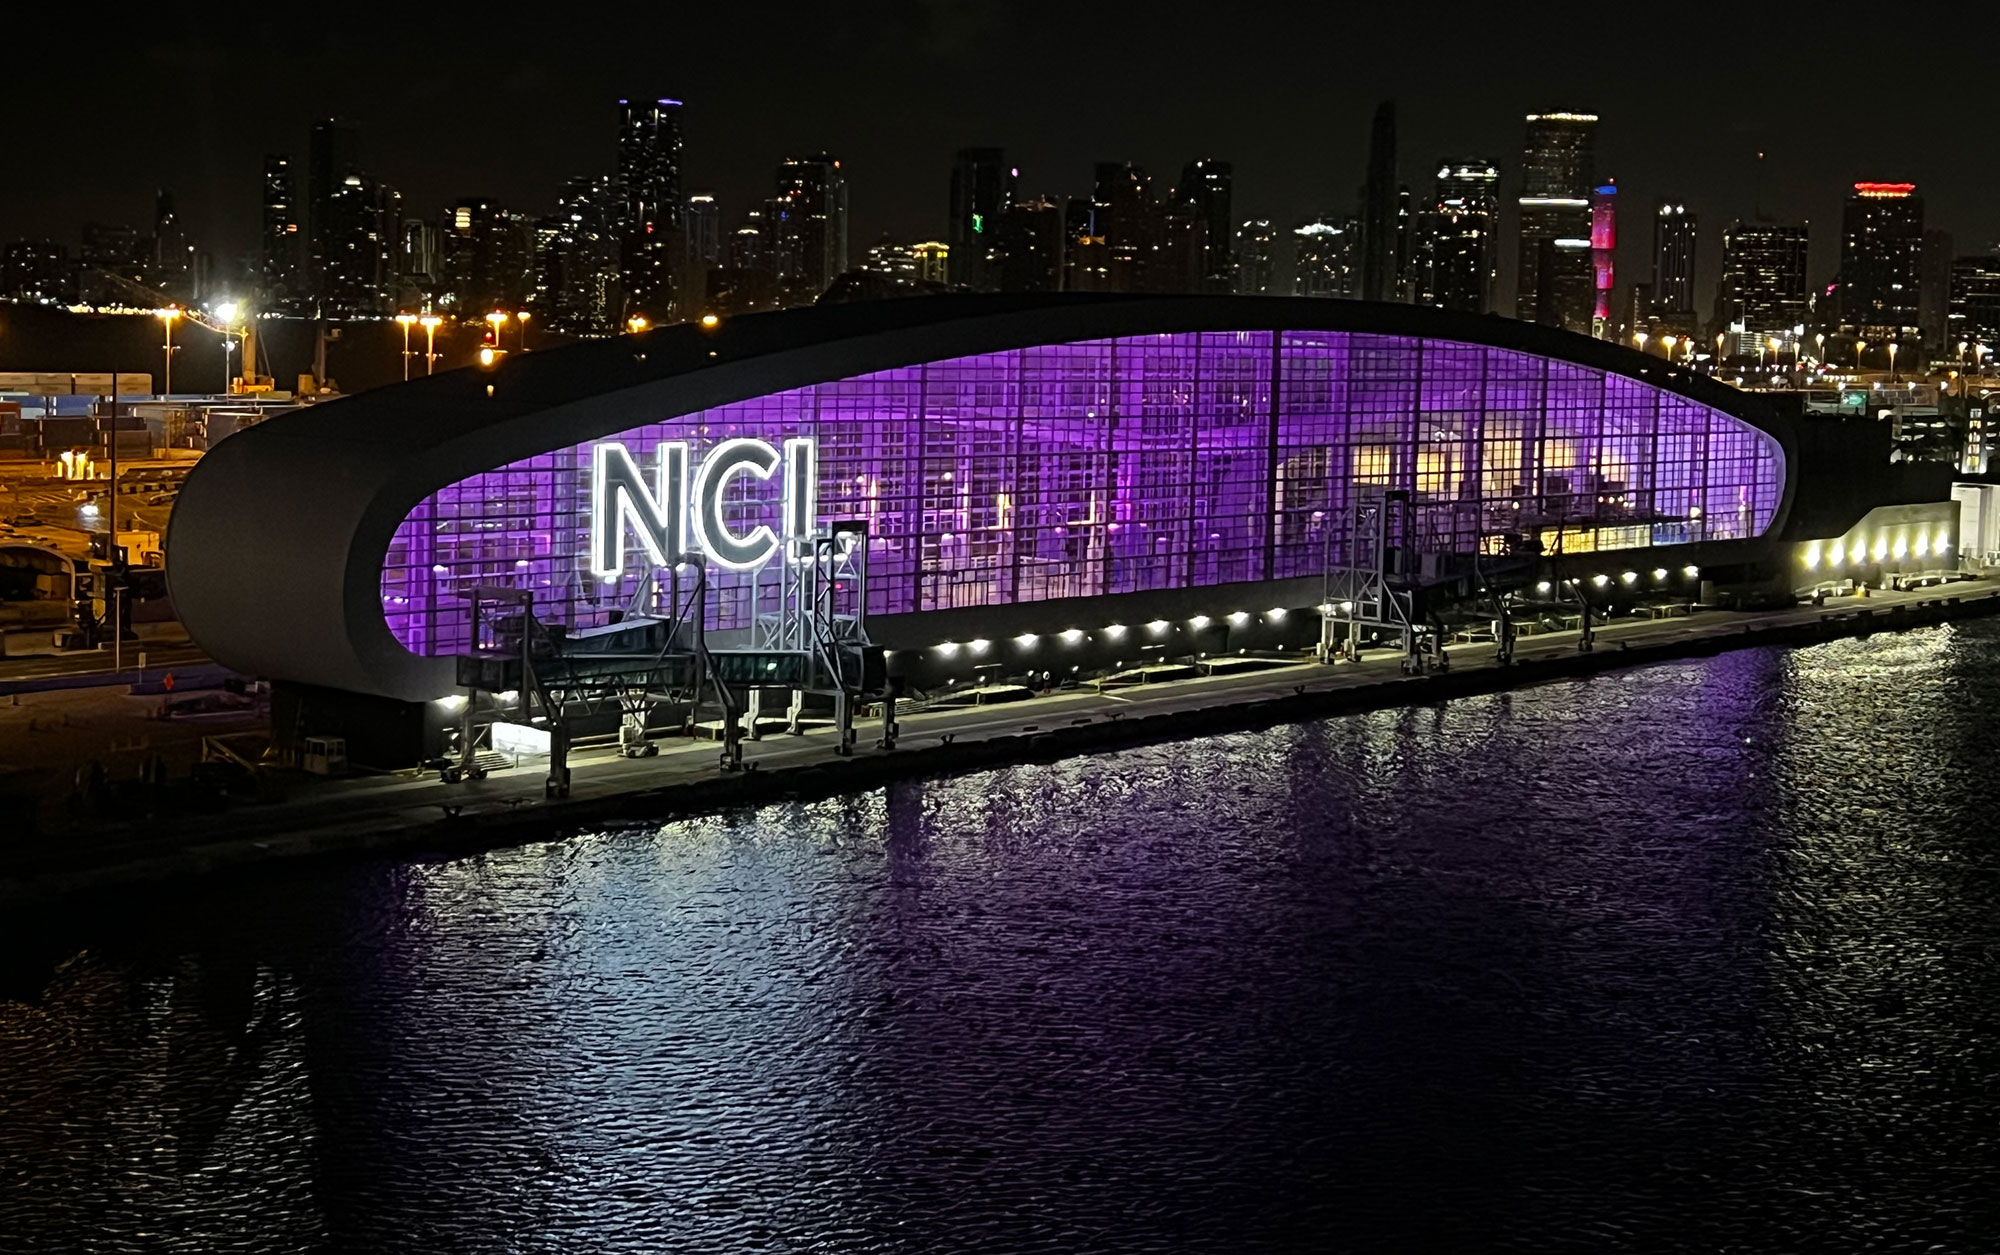 Norwegian Cruise Line reviews & helpful information – Know what to expect with NCL!